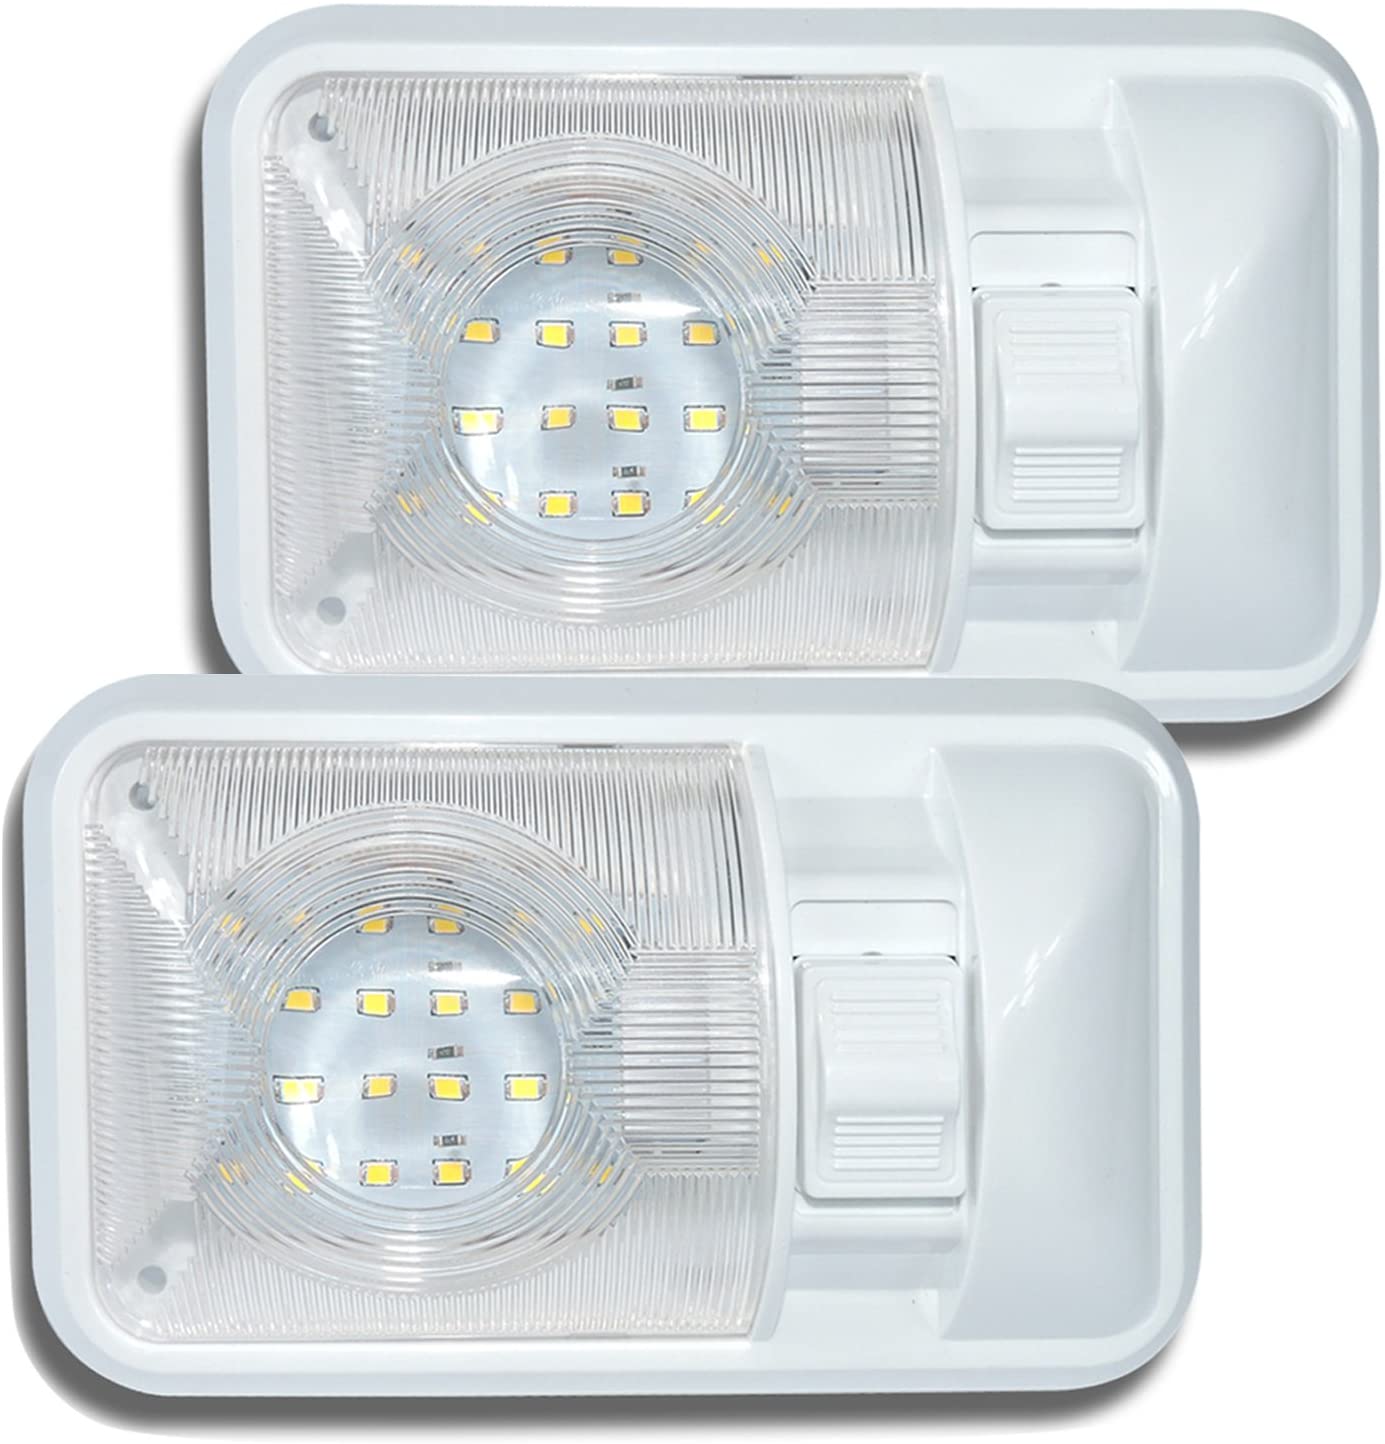 Inewteck LED 2 Pack 12V Led RV Ceiling Dome Light RV Interior Lighting for Trailer Camper with Switch, Single Dome 280LM